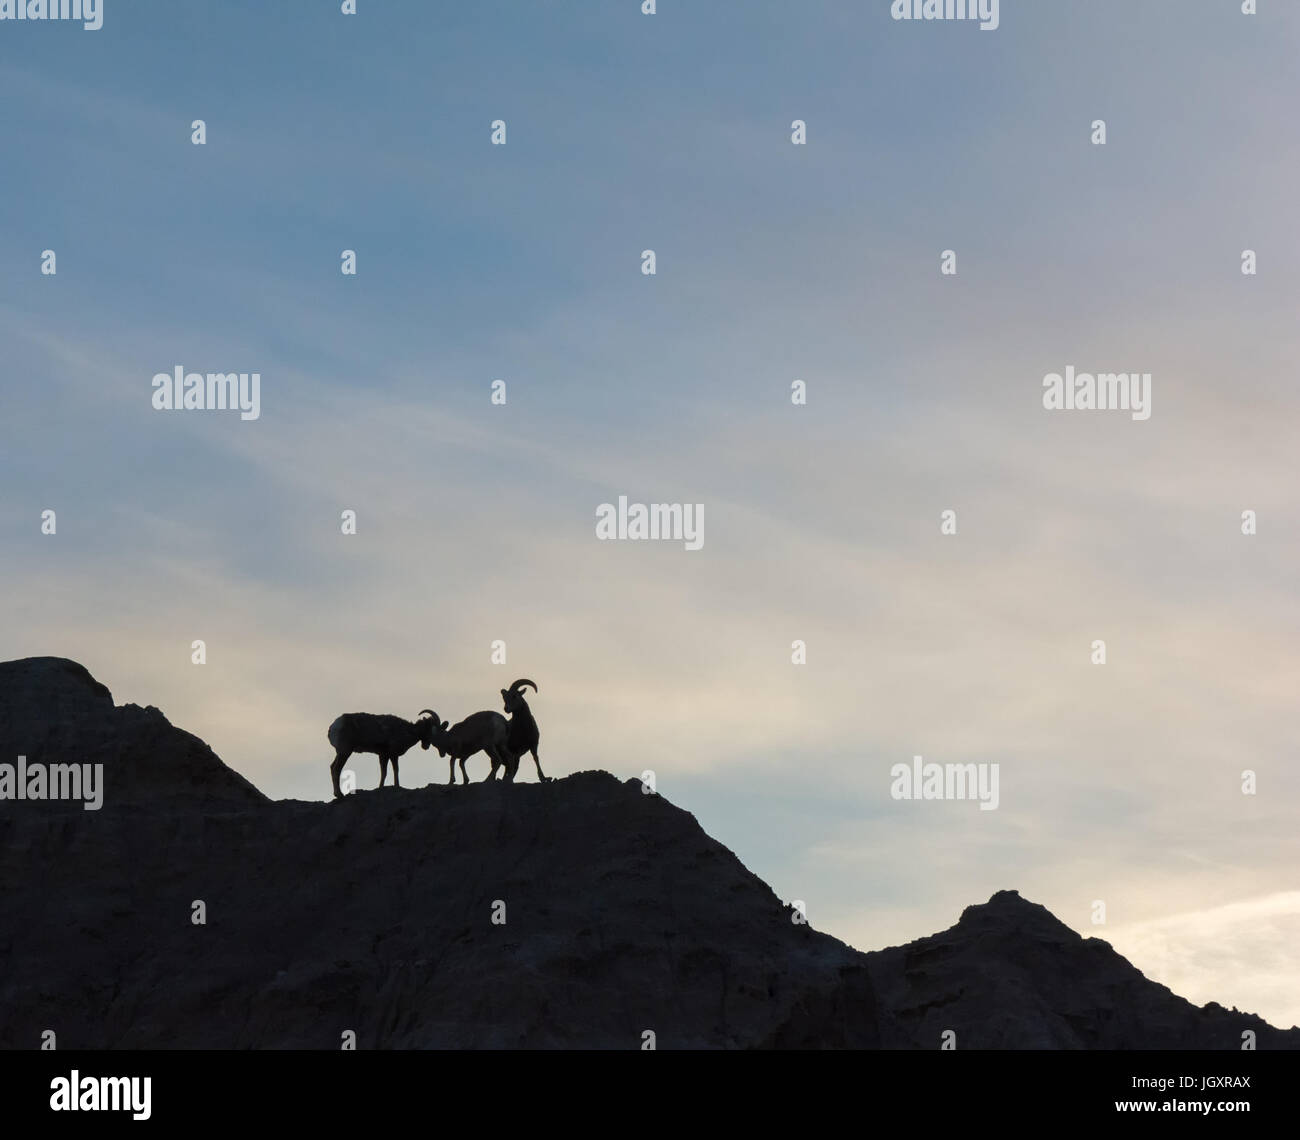 Three Big Horn Sheep are sihouetted against a bright sky while standing on a ridge line. Stock Photo